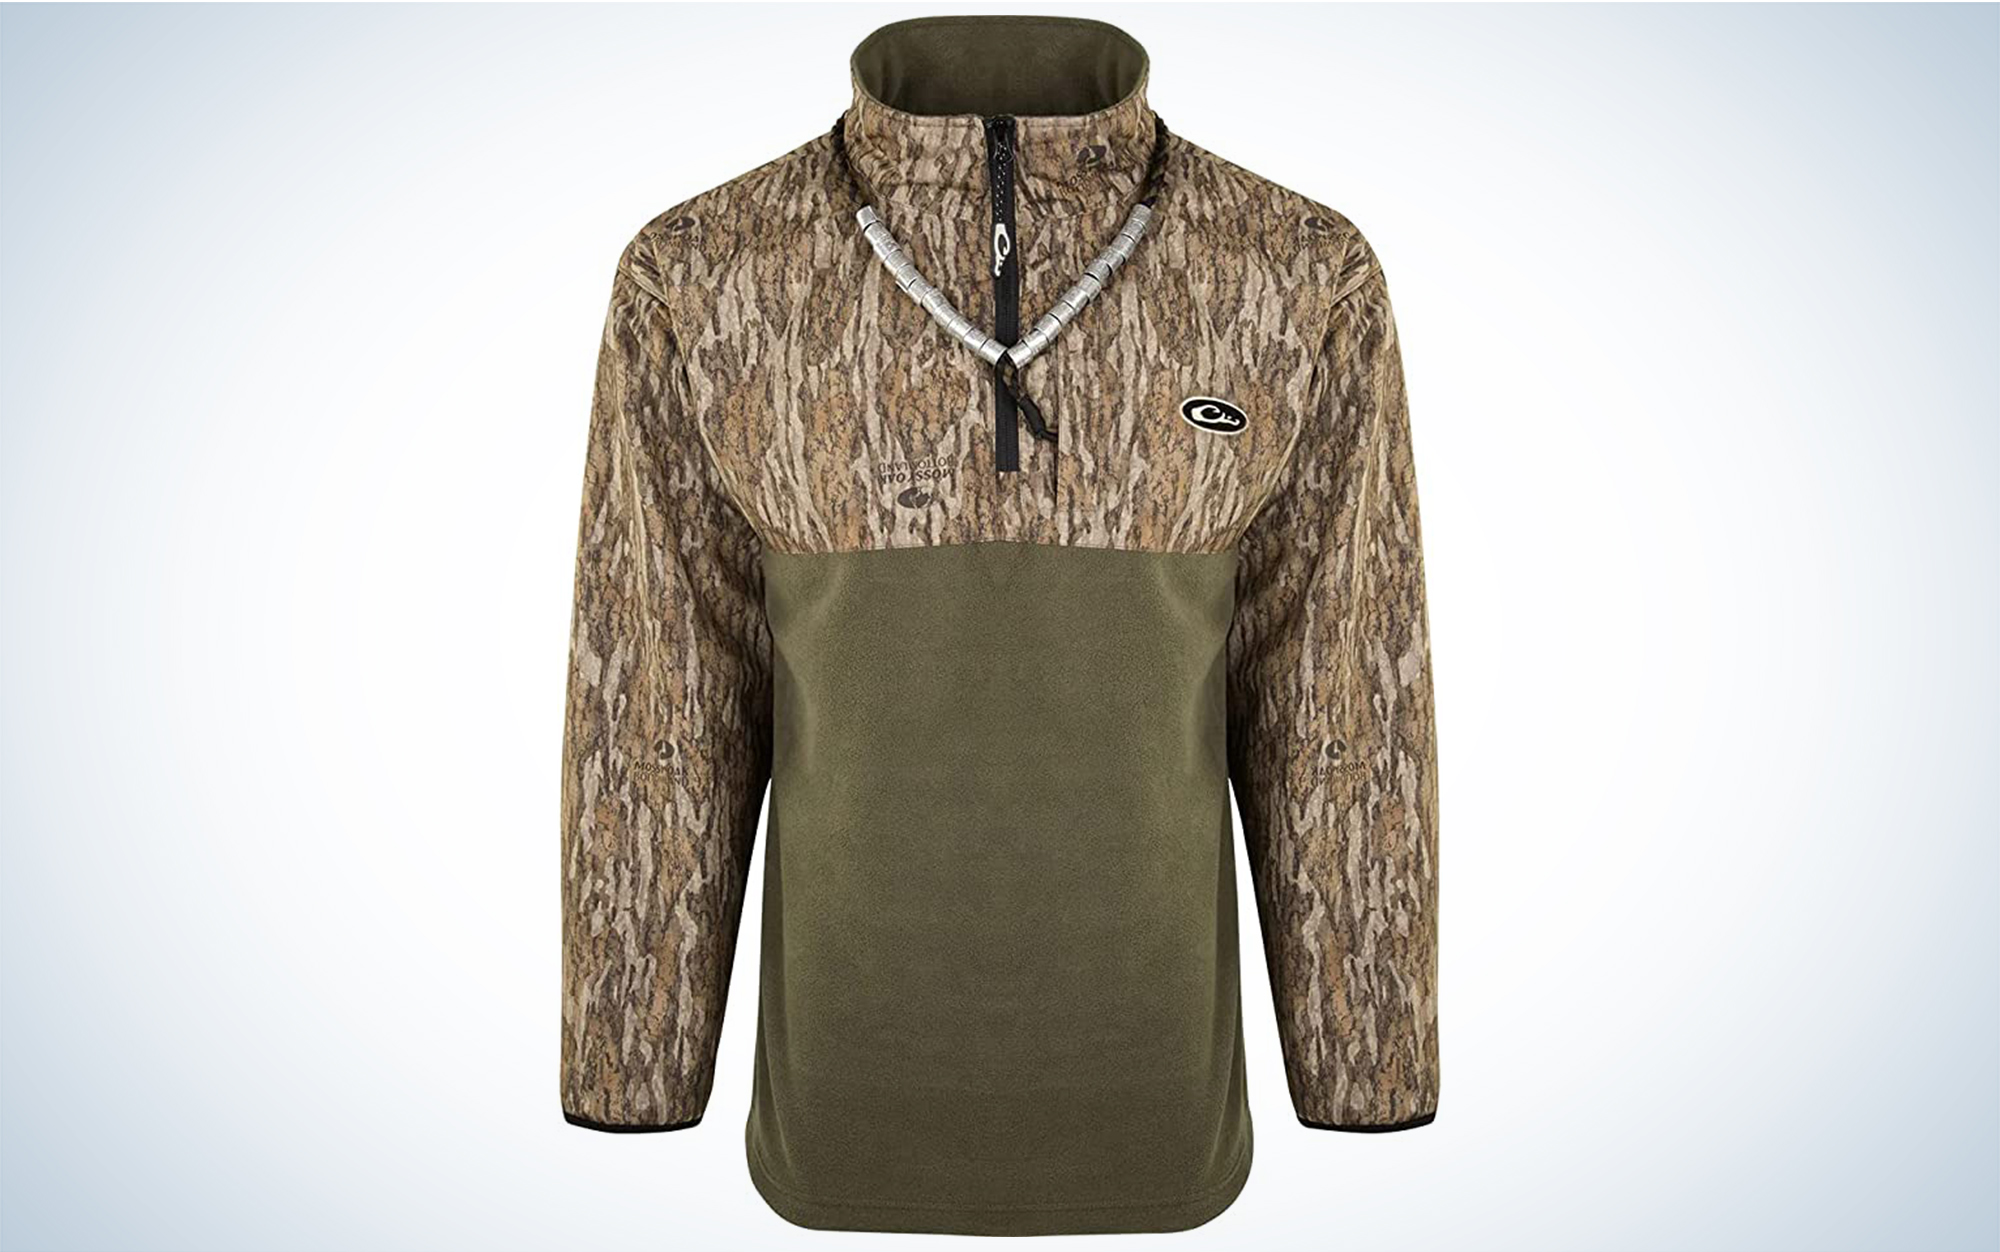 The Drake ¼ Zip Refuge Eqwader Jacket is the best duck hunting jacket for mid season.